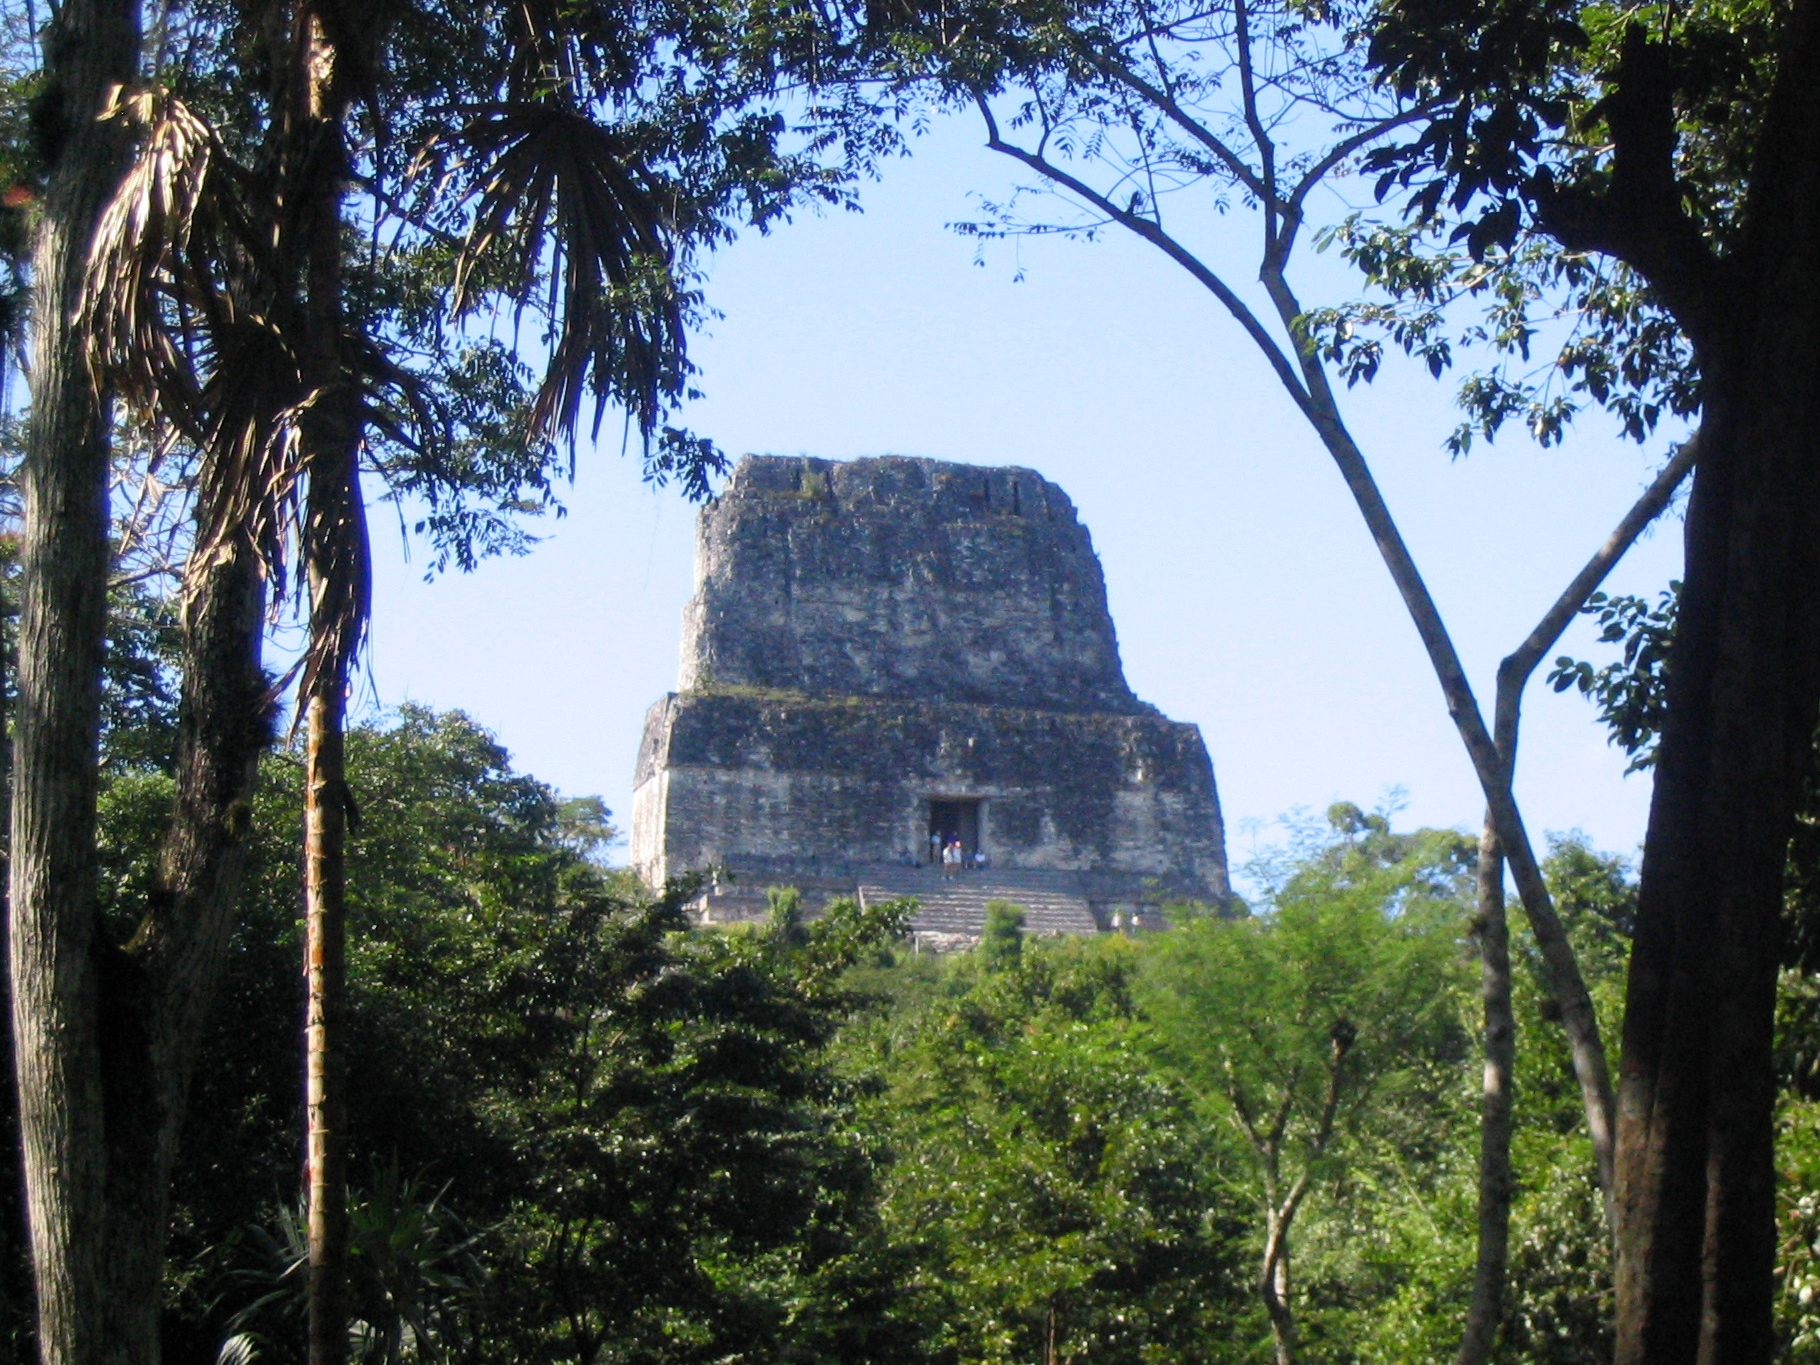 The top of Temple IV is just visible through the canopy as one looks up from below